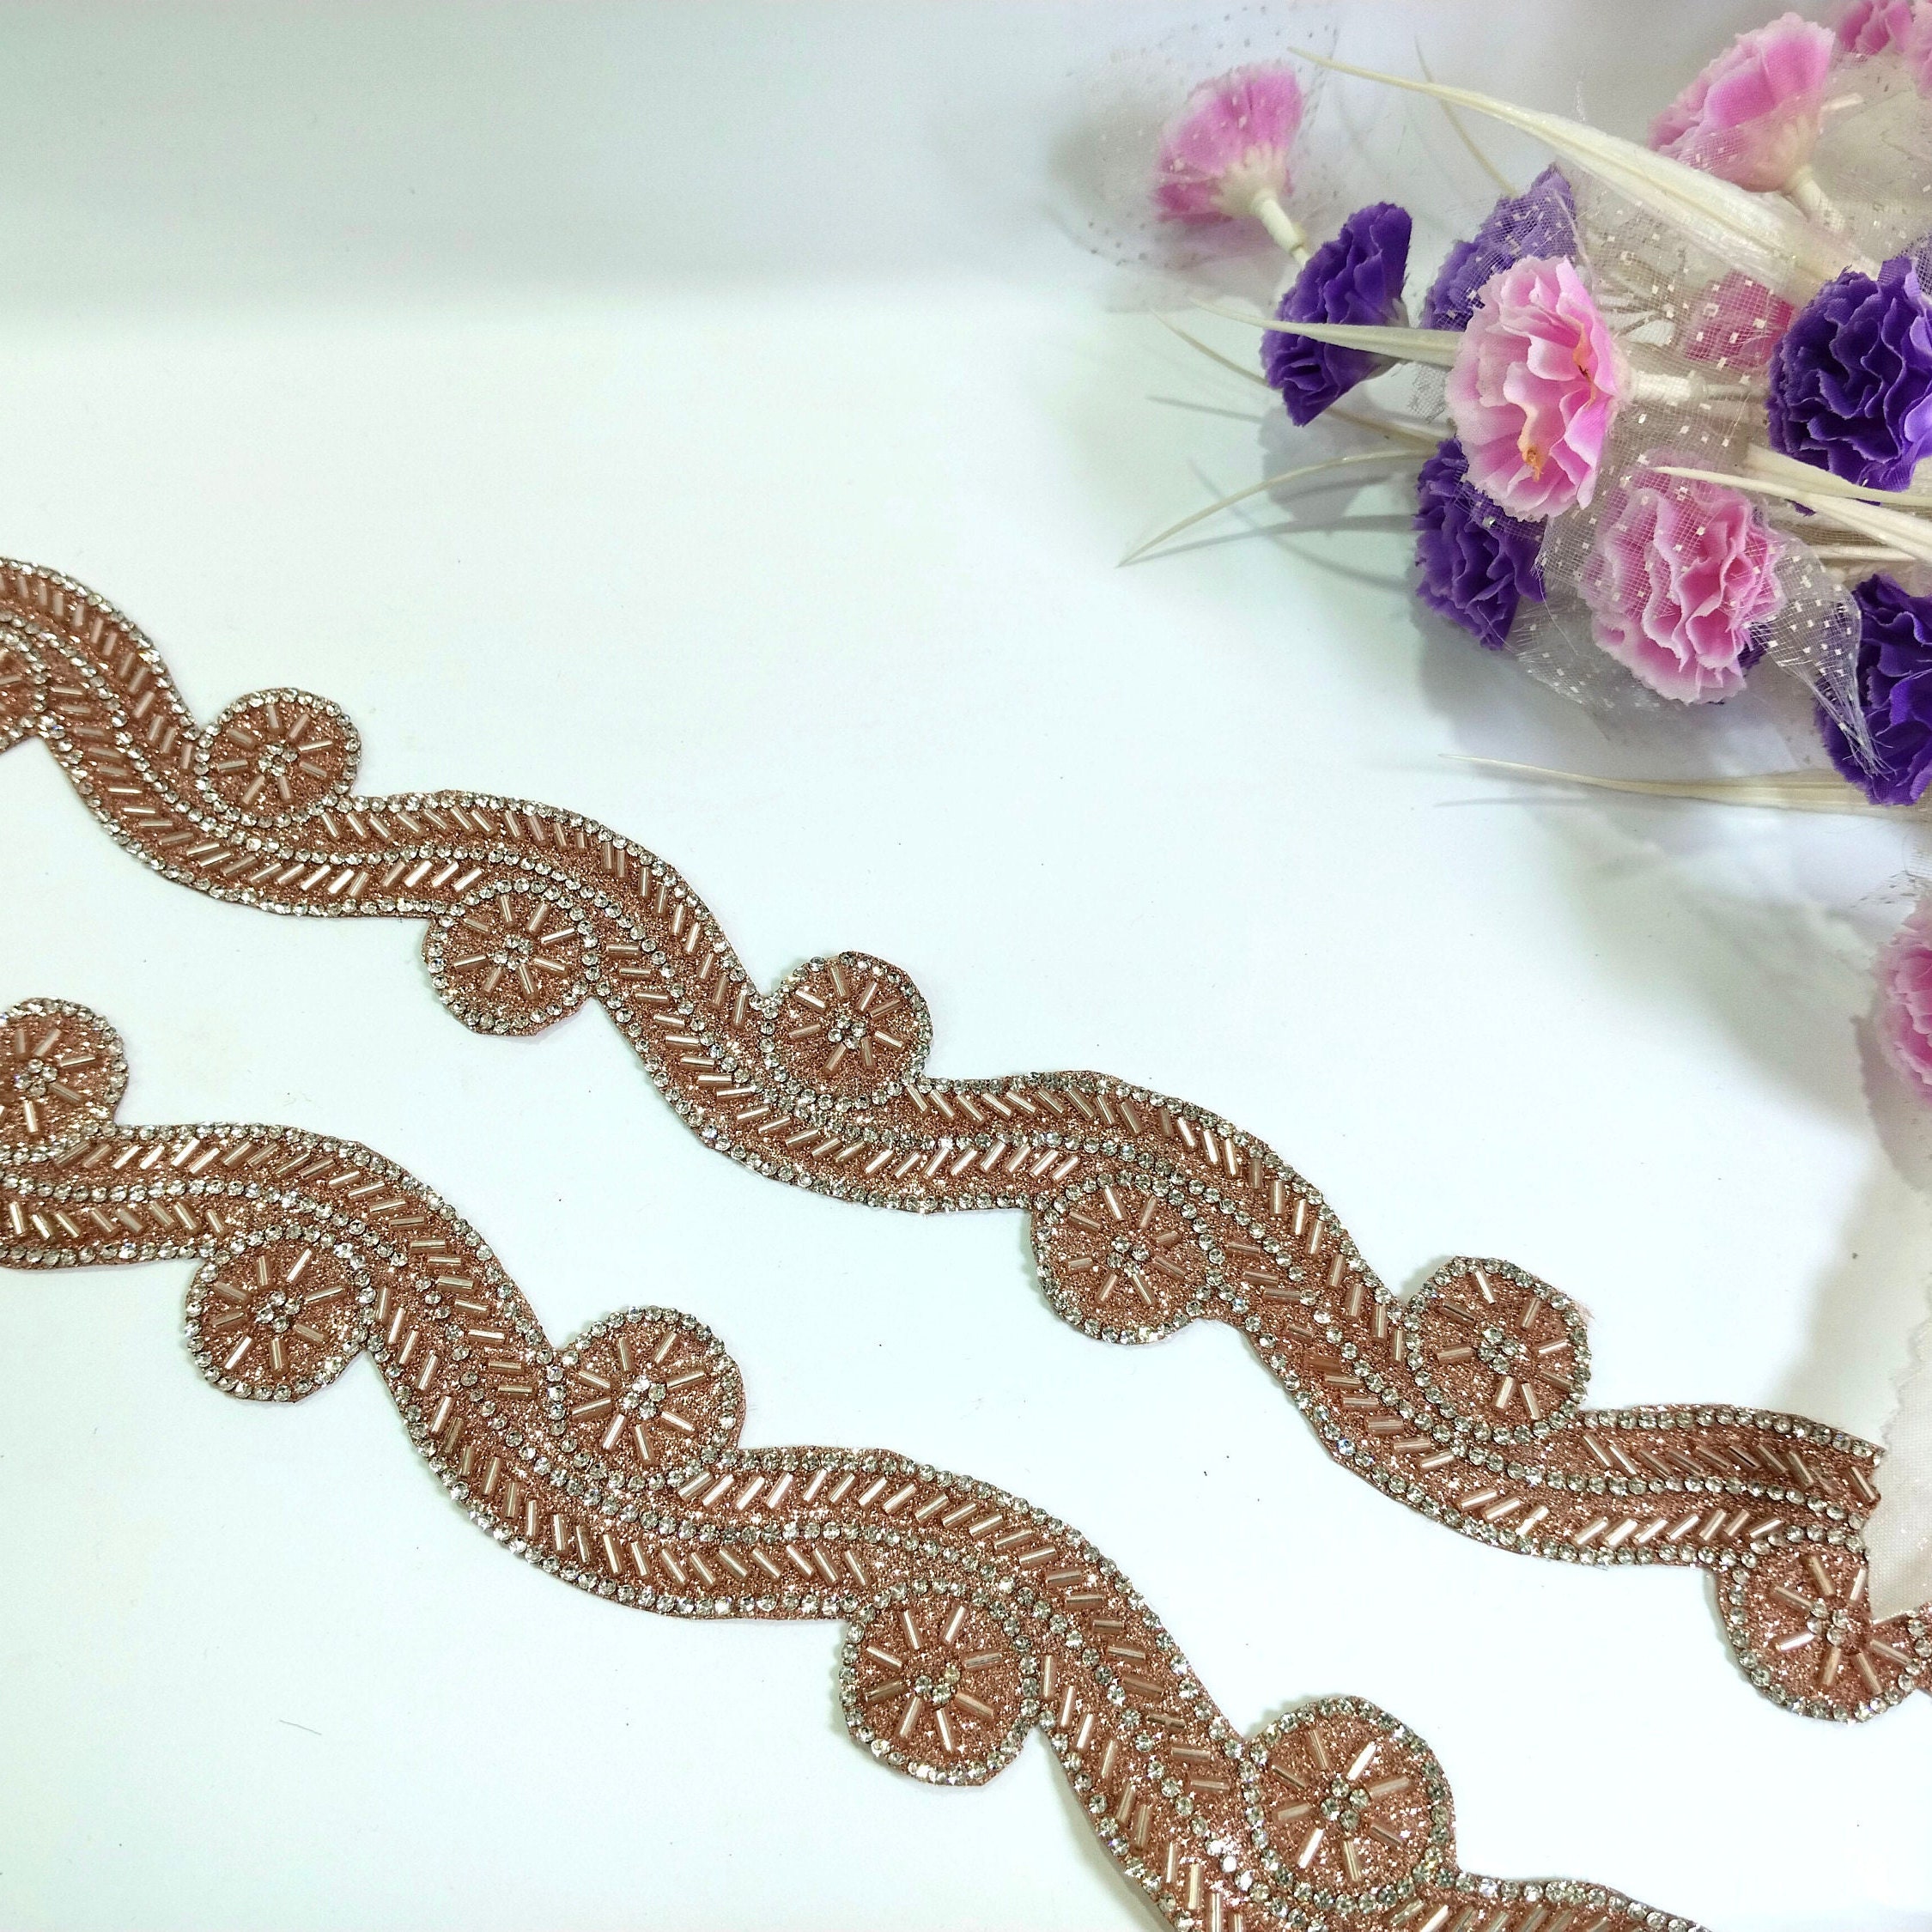 5 Meters/lot 1.2cm Width Vintage Gold Lace Trim Lace Fabric For Garment  Sewing Accessories Applique Crafts - Price history & Review, AliExpress  Seller - FantasticTouch